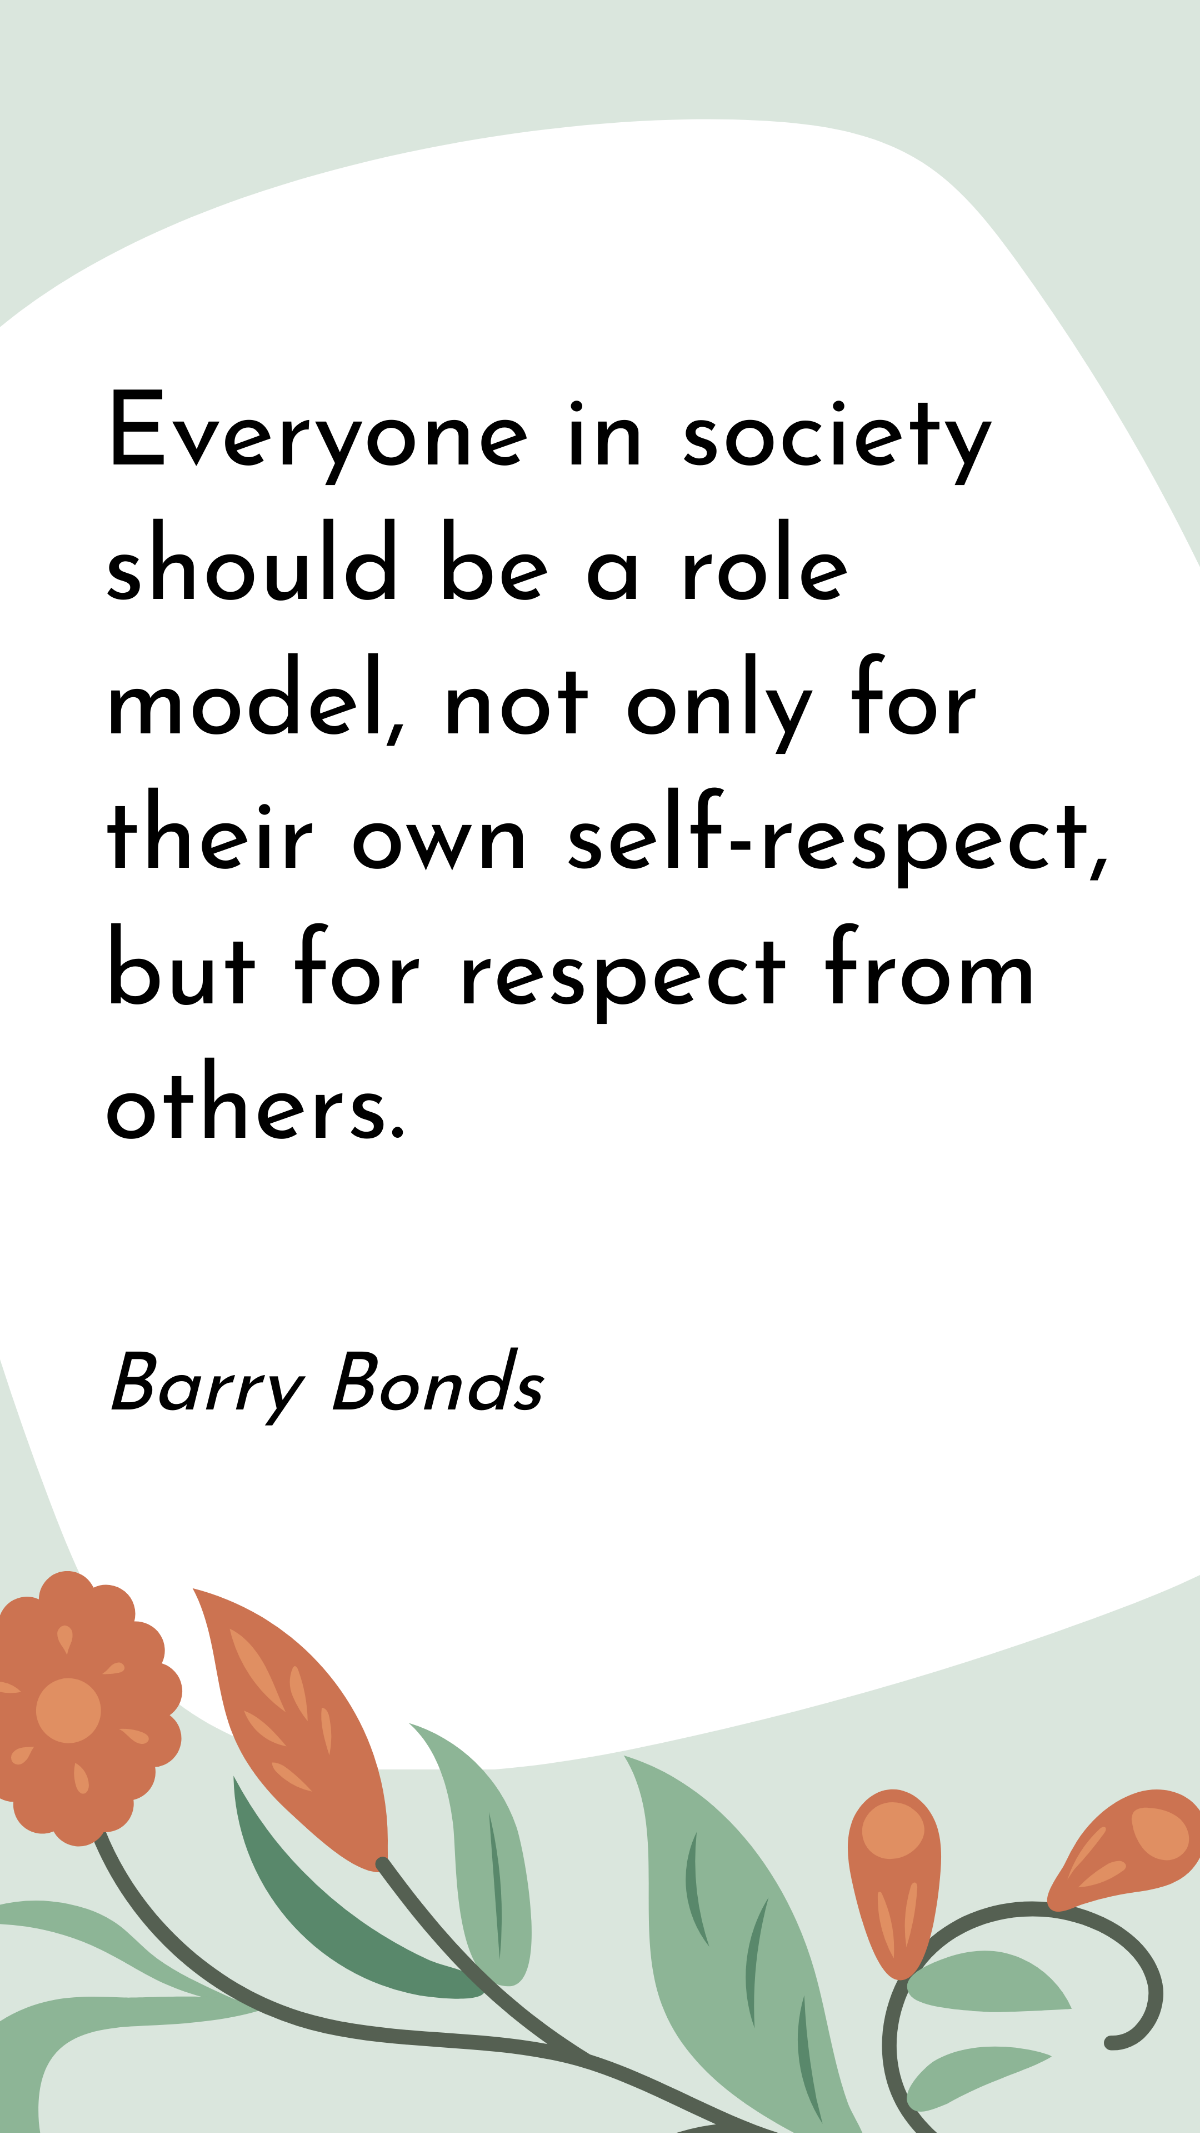 Barry Bonds - Everyone in society should be a role model, not only for their own self-respect, but for respect from others. Template